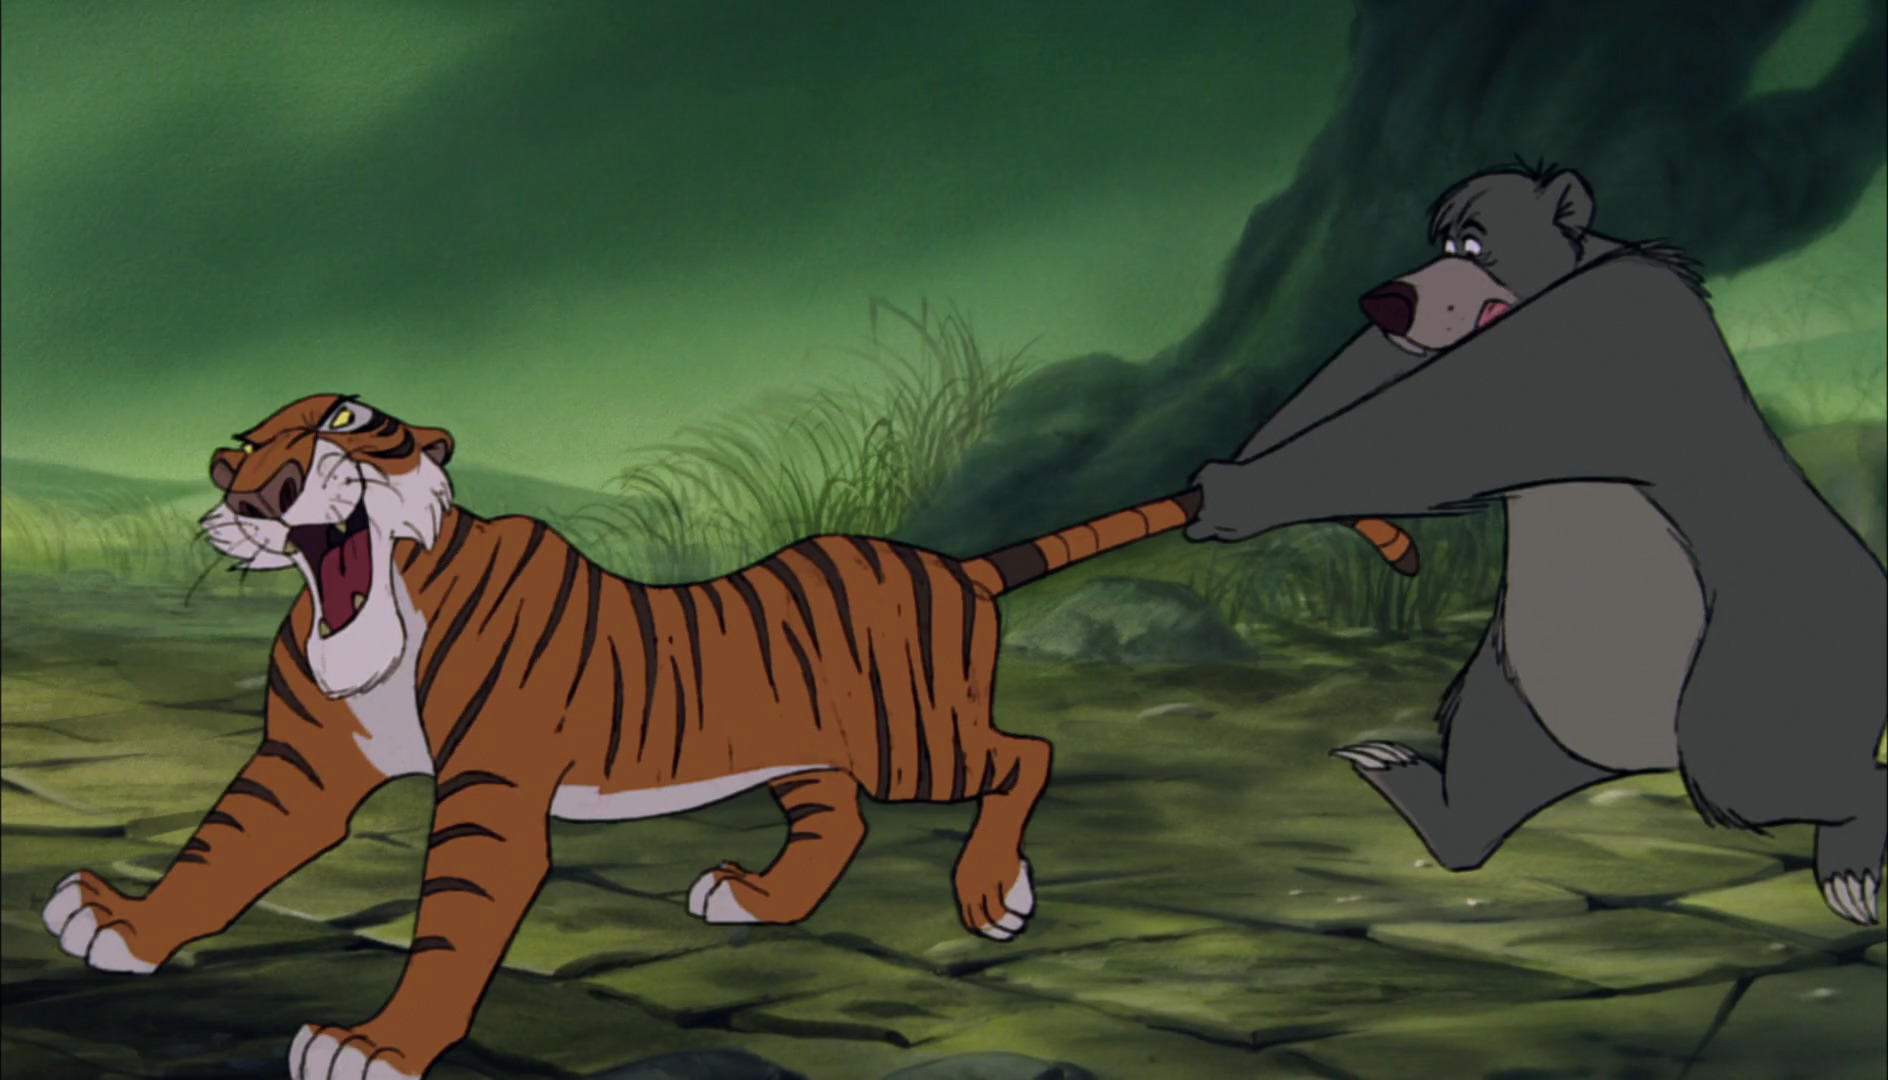 Baloo the bear is holding onto Shere Khan the Tiger s tail